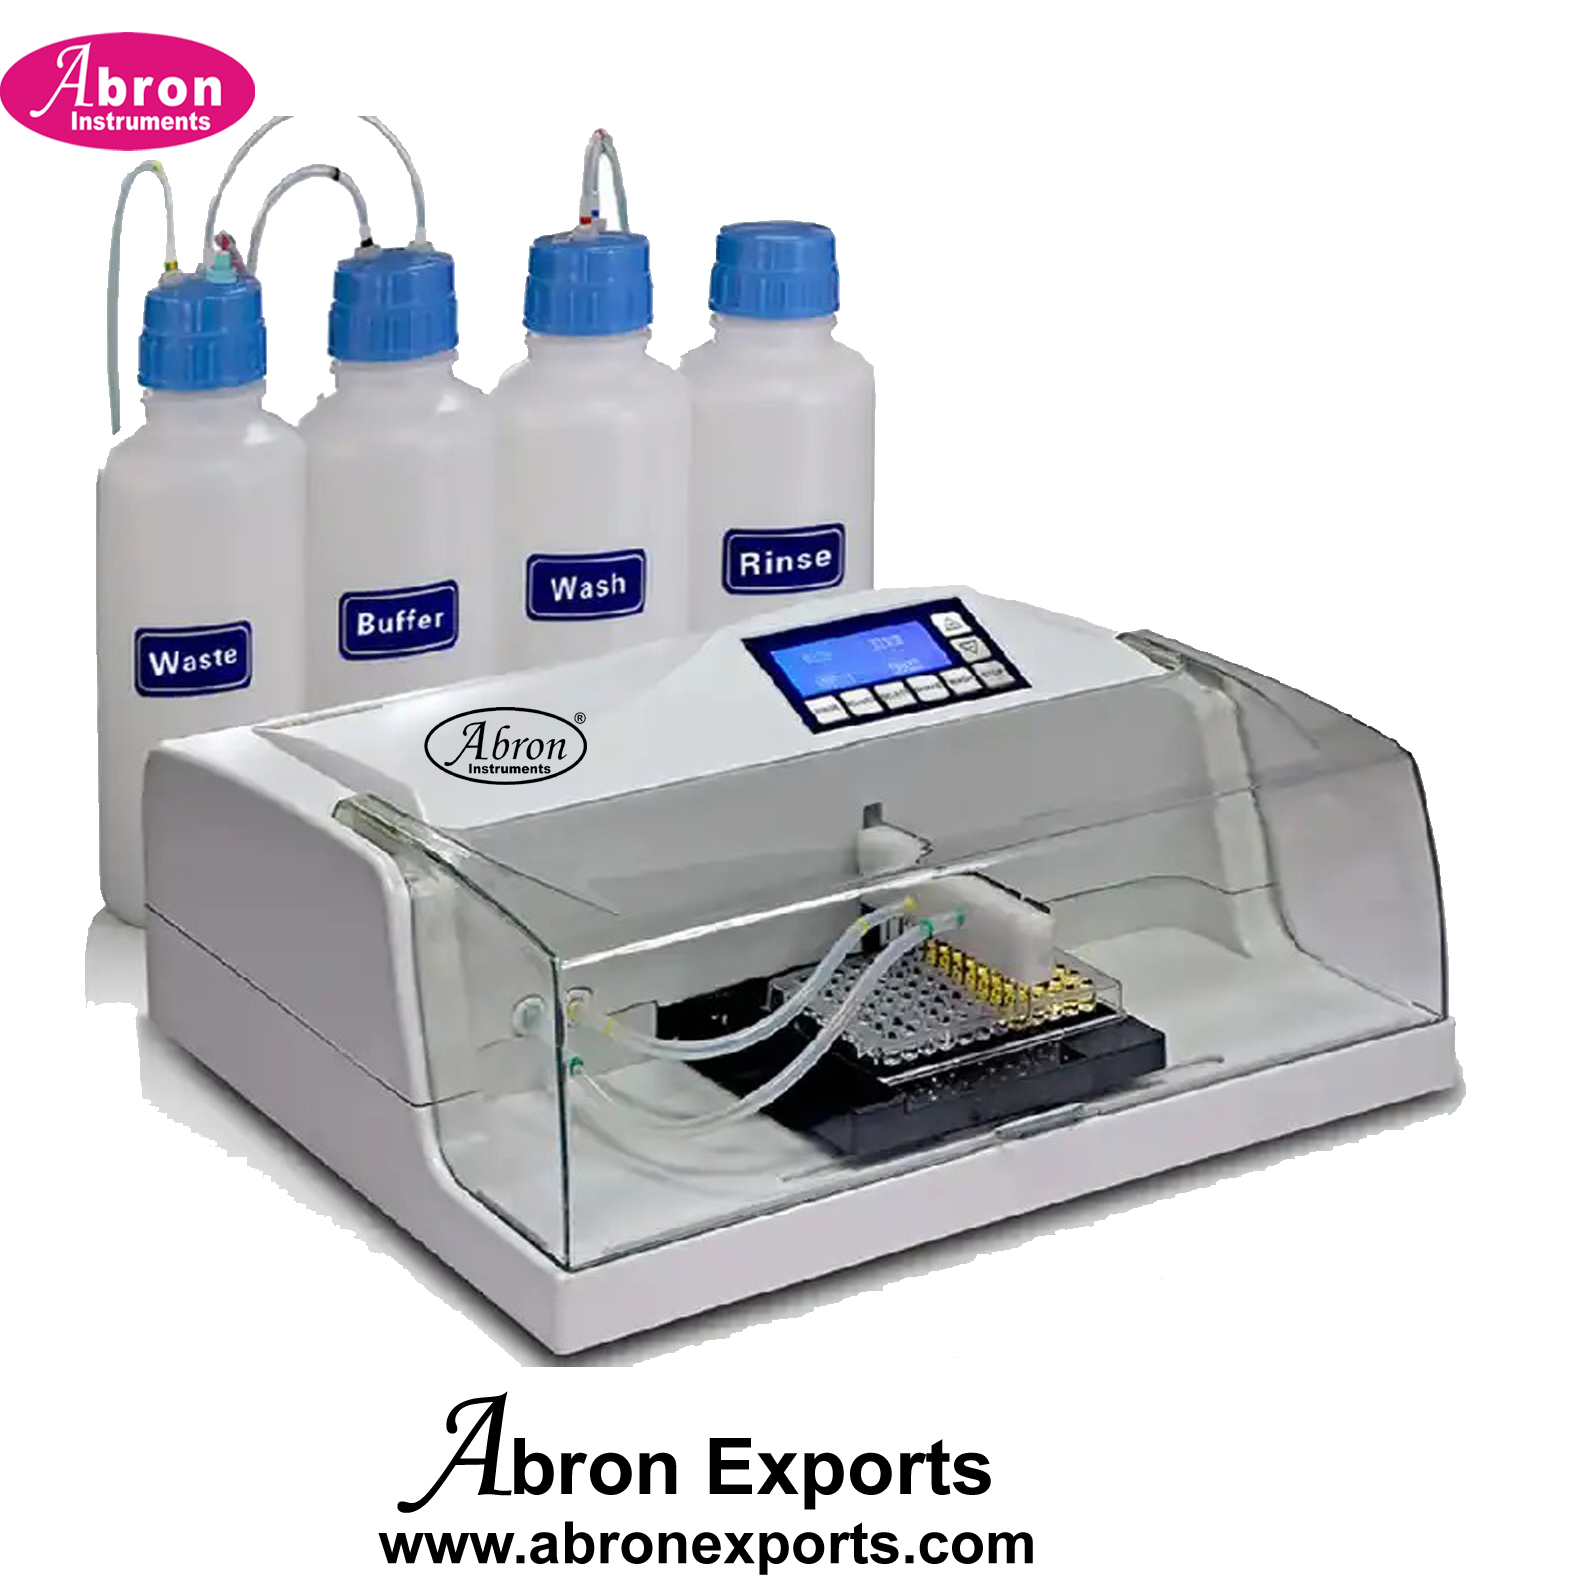 Elisa Micro Plate Washer 1-2 point 3 Speeds Digital Screen With 50-3000ul Well Abron ABM-2759W 